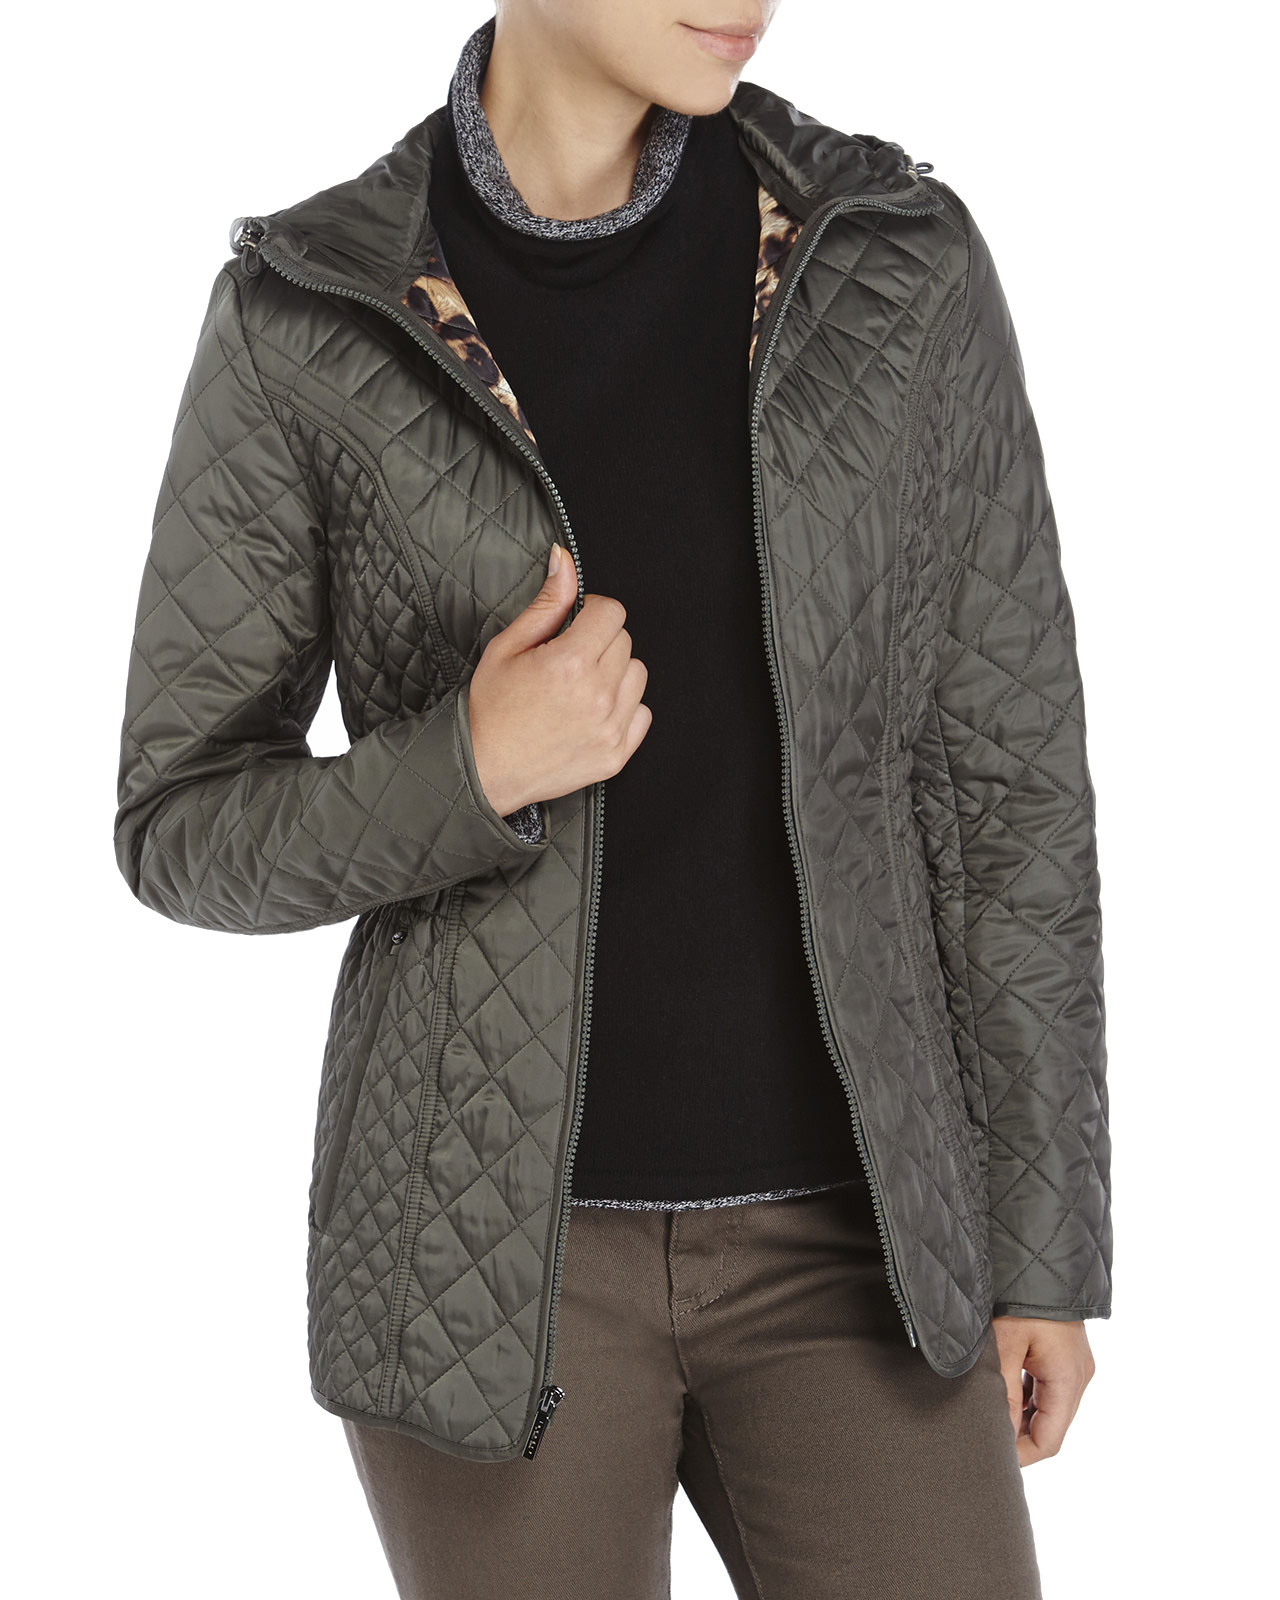 Lyst - Laundry by Shelli Segal Diamond Quilted Hooded Jacket in Green